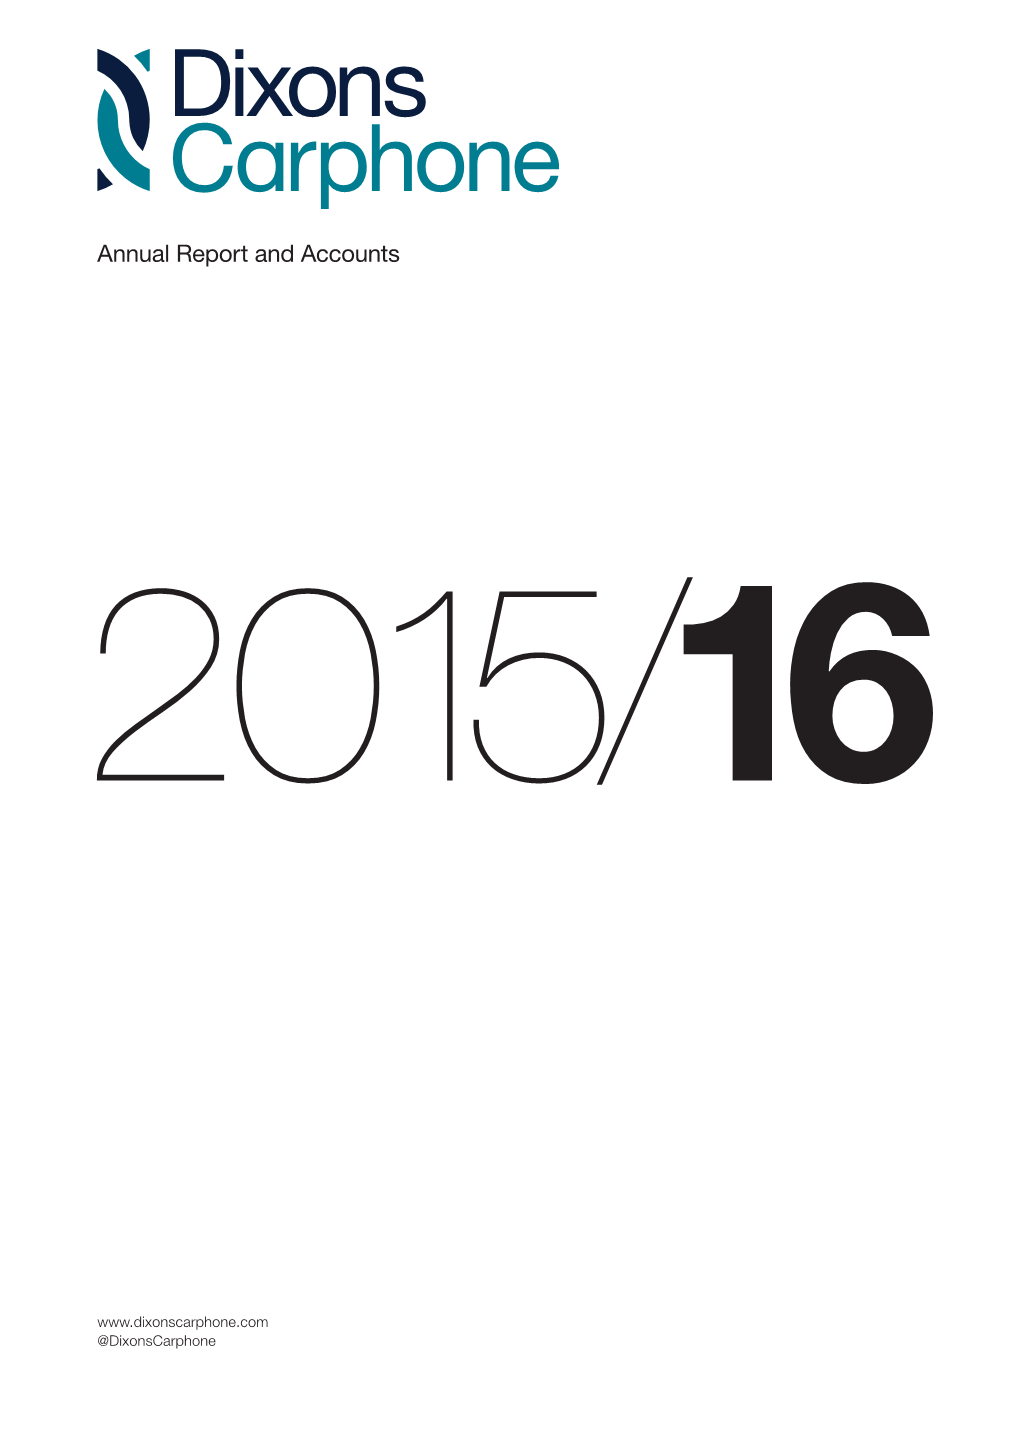 Annual Report and Accounts Annual Report and Accounts and 2015/16 Report Annual 2 015 /16